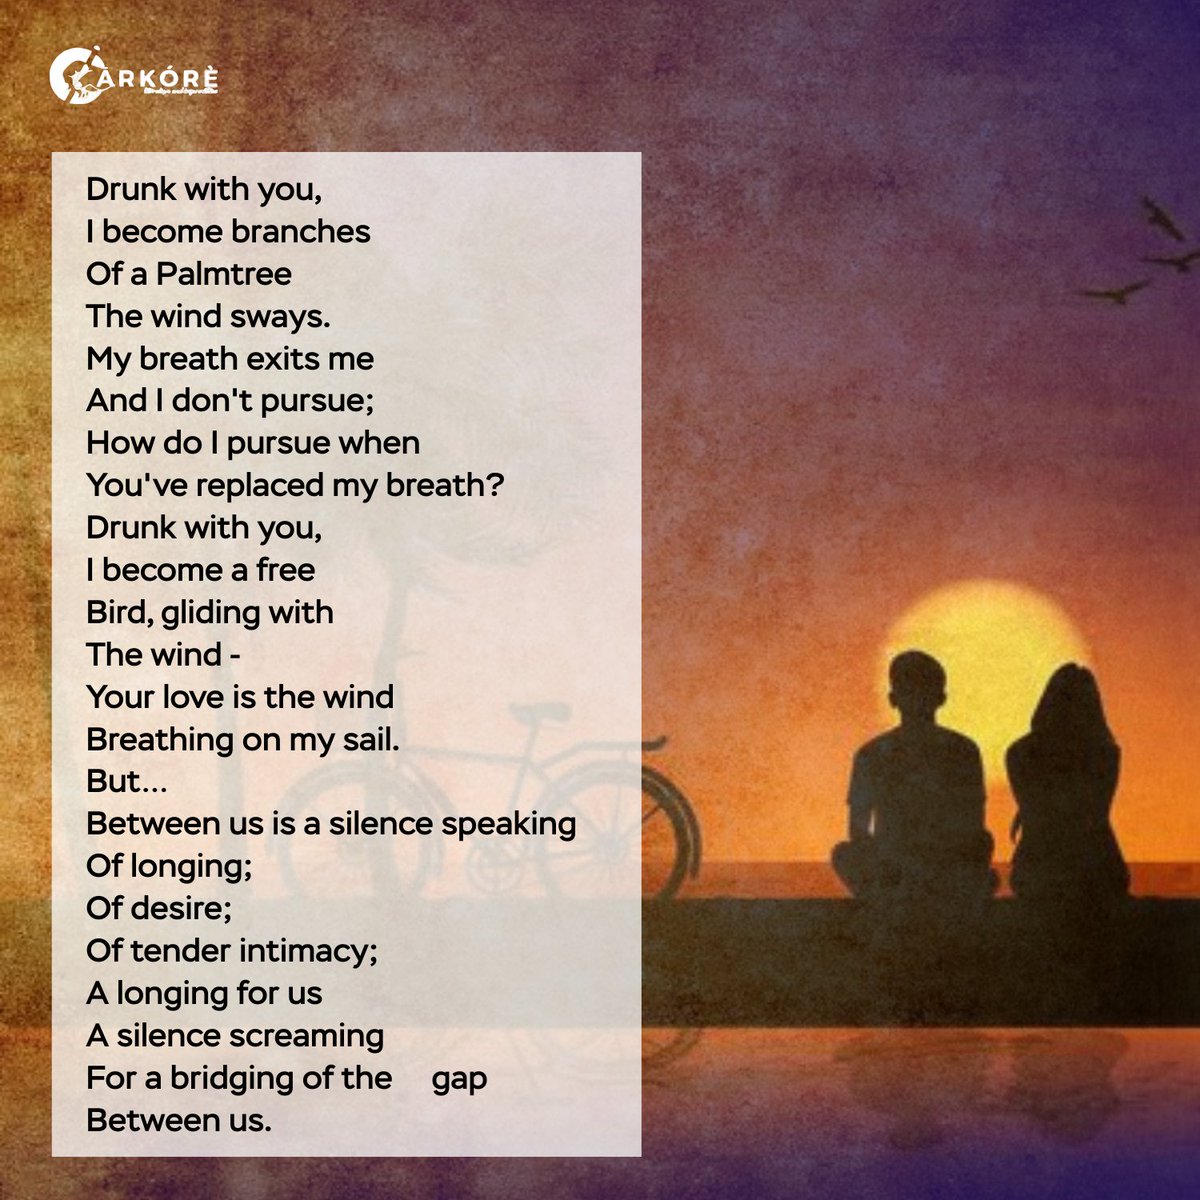 Through the lens of nature's wonders, Korede Teriba speaks about love, longing, and the unspoken connections that bind us in his poem.

#poetrycommunity #lovepoetry #poetrytwitter #WritingCommmunity #poetrylovers